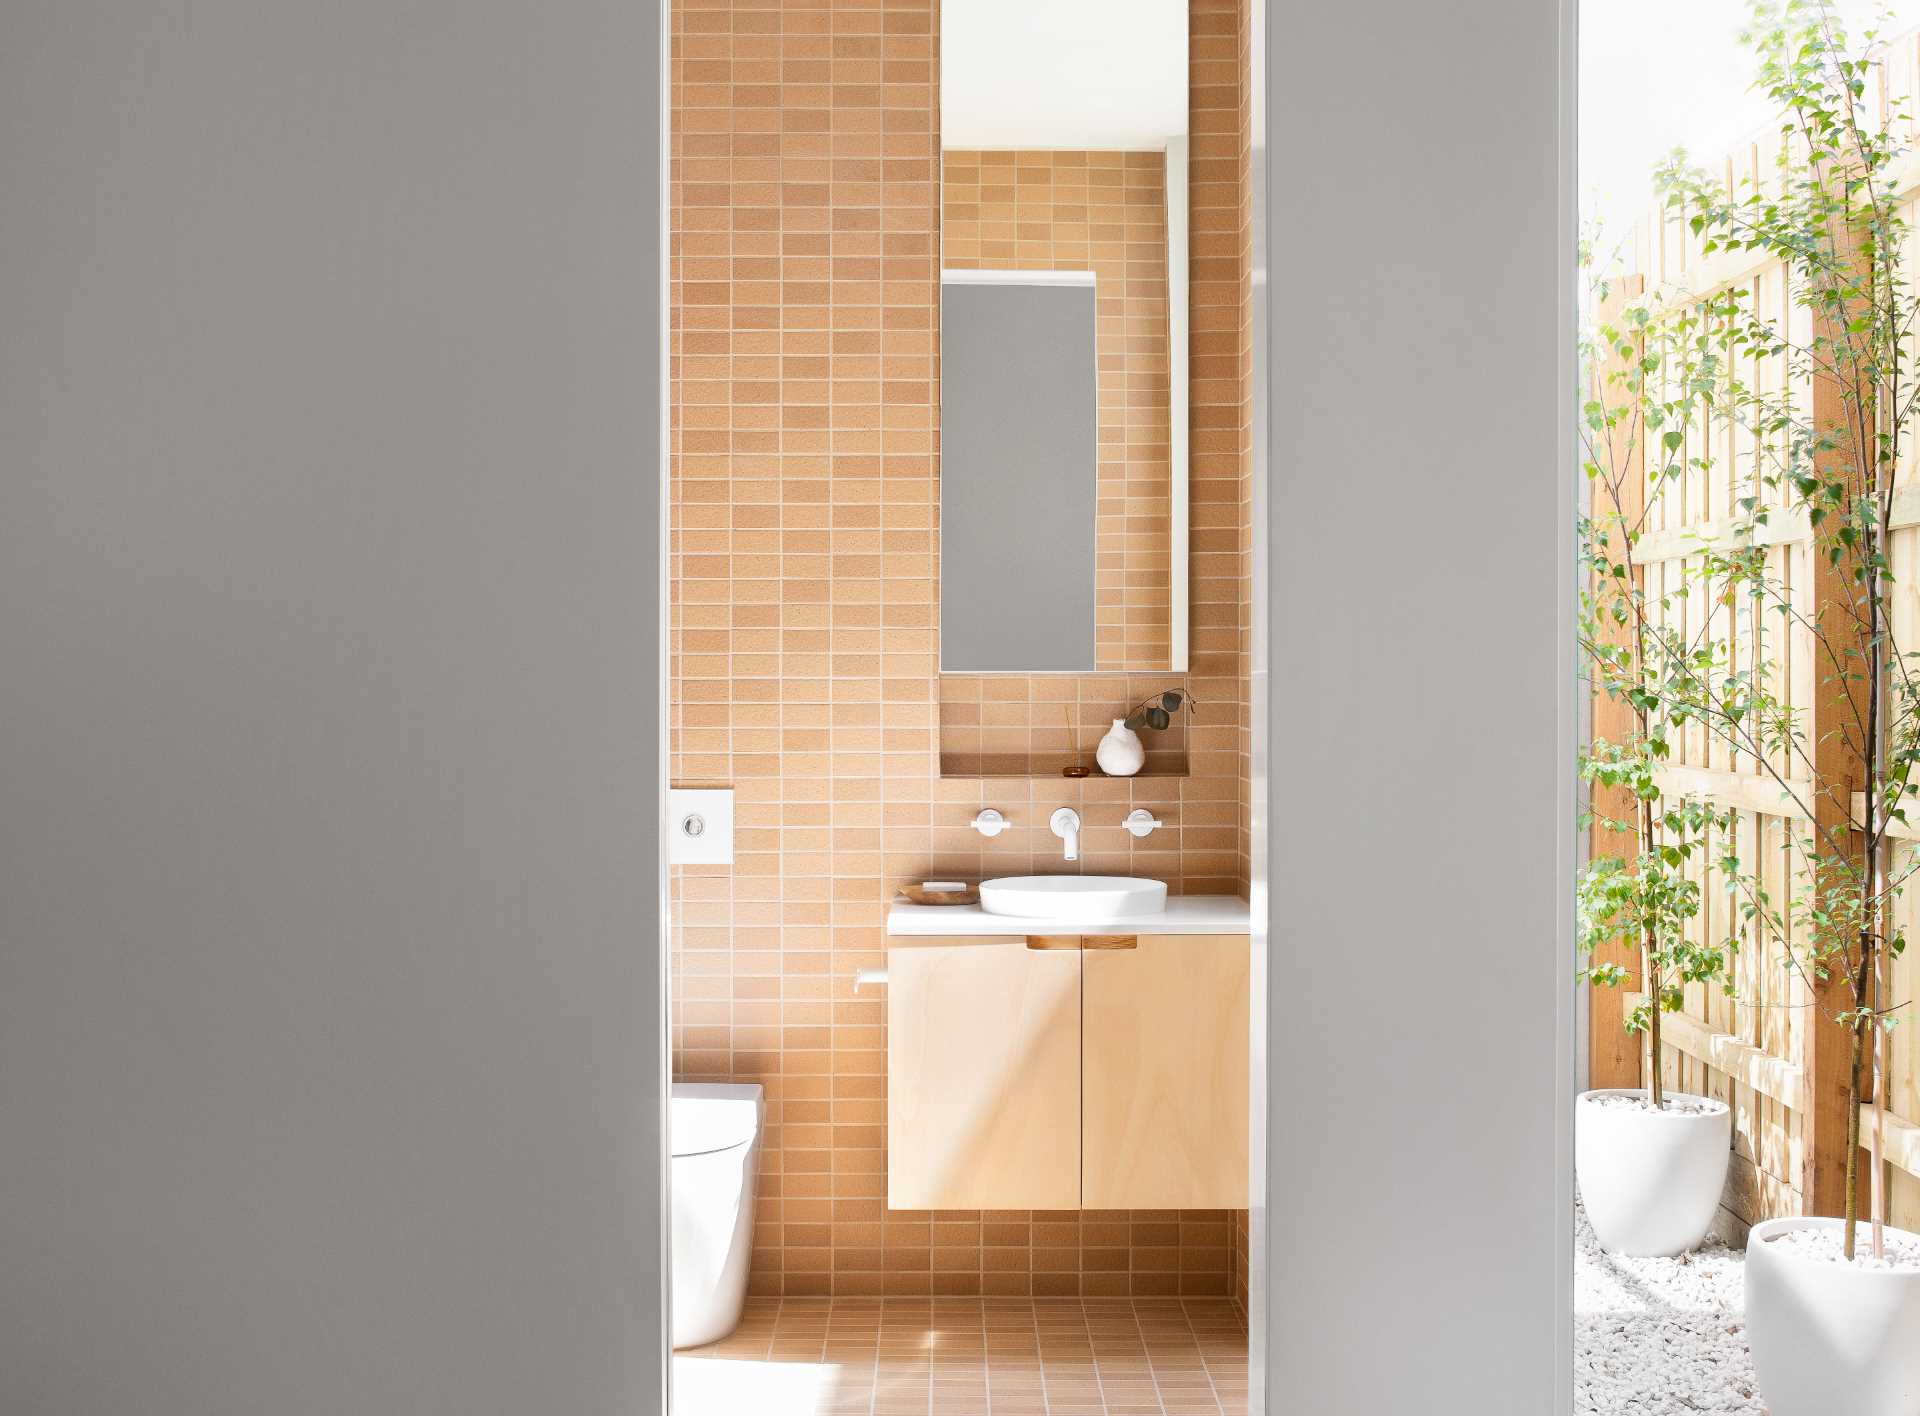 In this modern bathroom, textural Japanese tiles in a terracotta color were chosen to reflect an earthiness, while the crisp white fixtures add freshness, lightness, and a contrasting element.